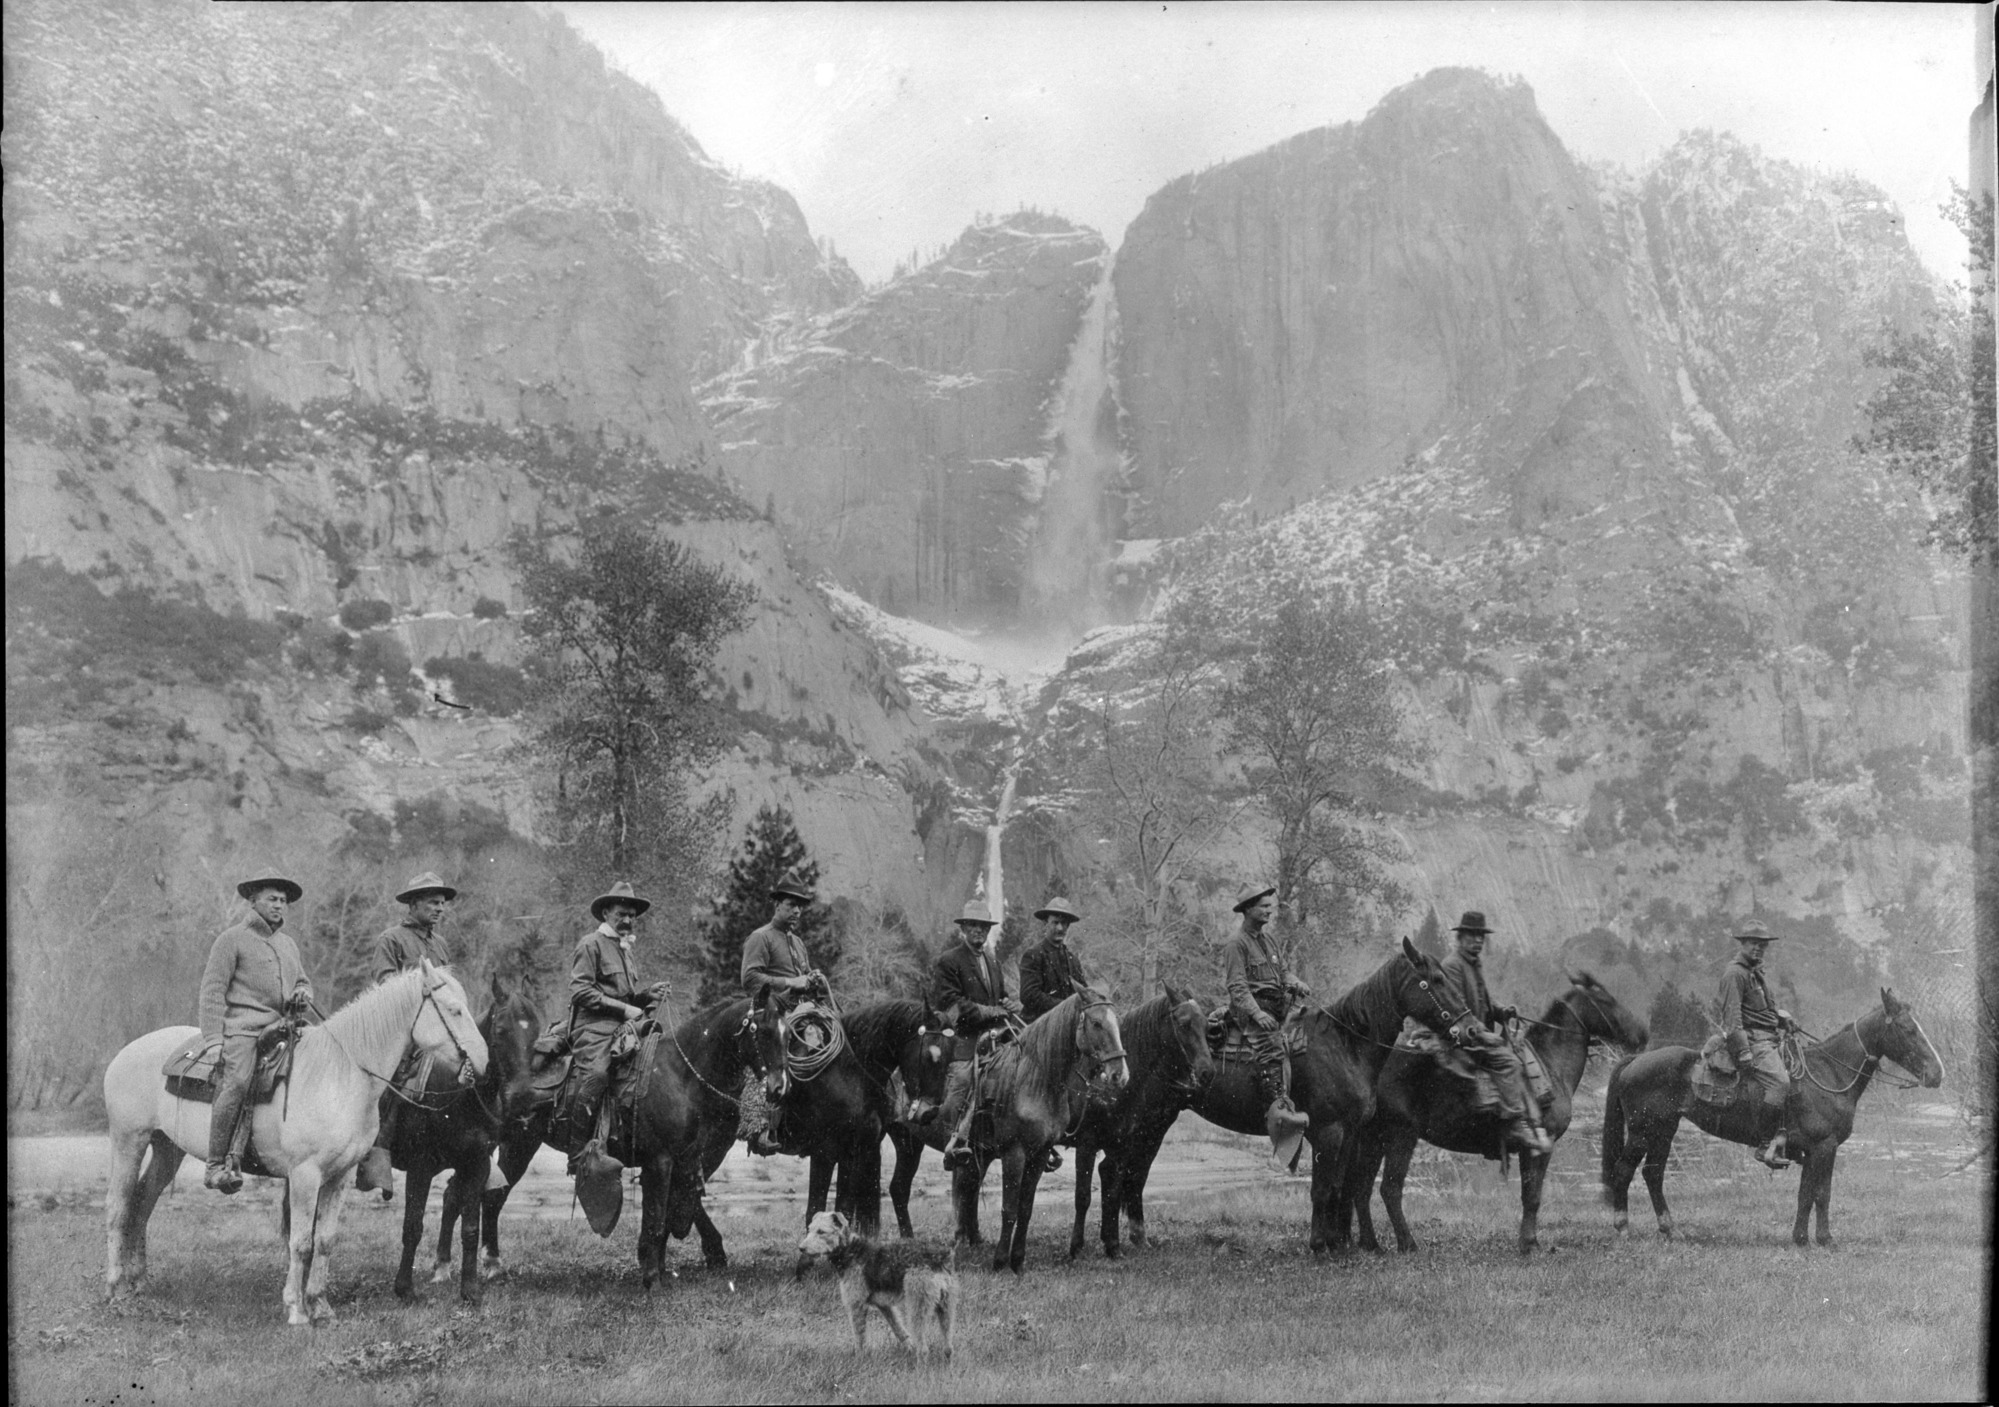 The First Rangers LEFT TO RIGHT: Oliver Prien, Chief Ranger; Charles Bull, Assist. Chief Ranger; Jack Gaylor, 2nd assist. to Chief Ranger; Wayne Westfall; George McNab, Charles Leidig, First Park Ranger in Yosemite; Charles Adair; Archie Leonard; Forest Townsley. [See: annual Supt's Report - 19 979.447/Y-83].